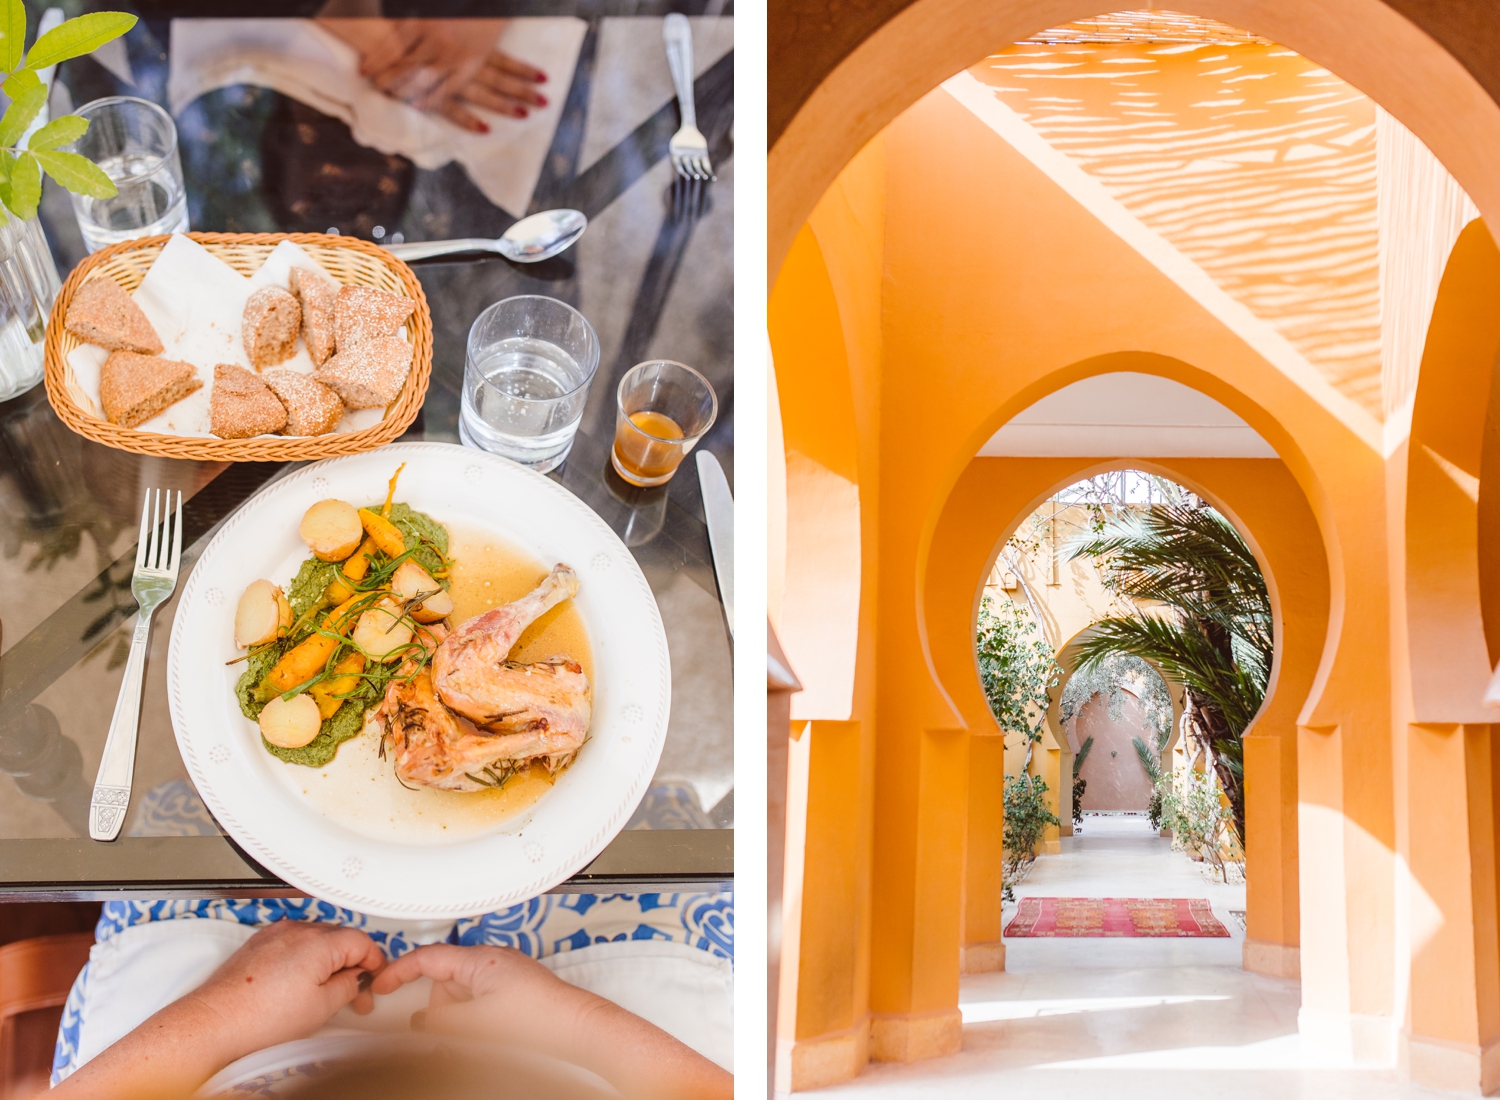 Plate full of Moroccan food including chicken and vegetables | Hallway lined with orange arches in Marrakesh, Morocco | Brooke Michelle Photography